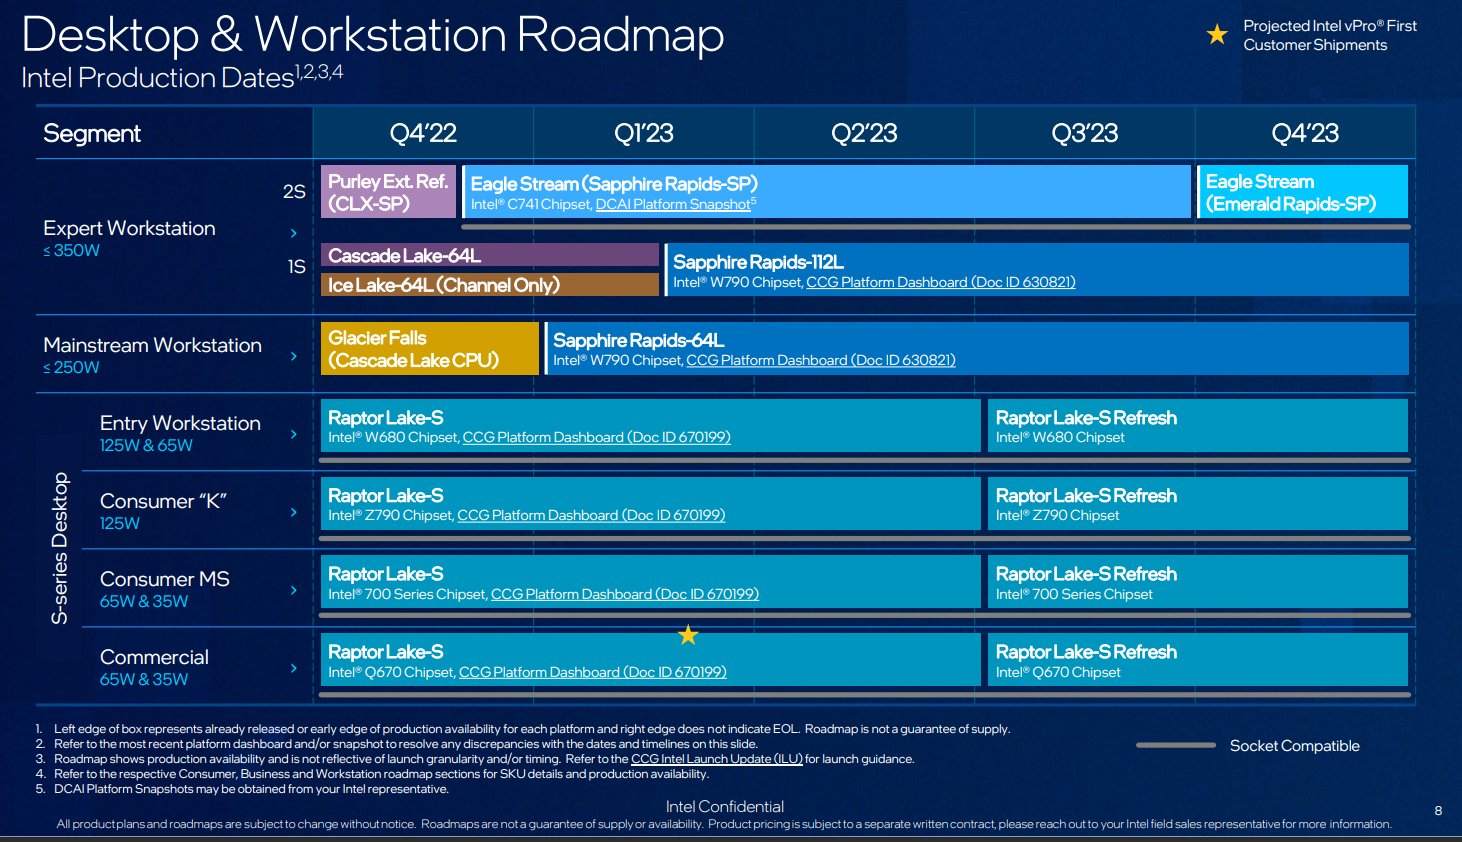 Intel's processor plans for 2023 have been revealed: Raptor Lake-S Refresh, Sapphire Rapids-WS and special Sapphire Rapids-SP for workstations